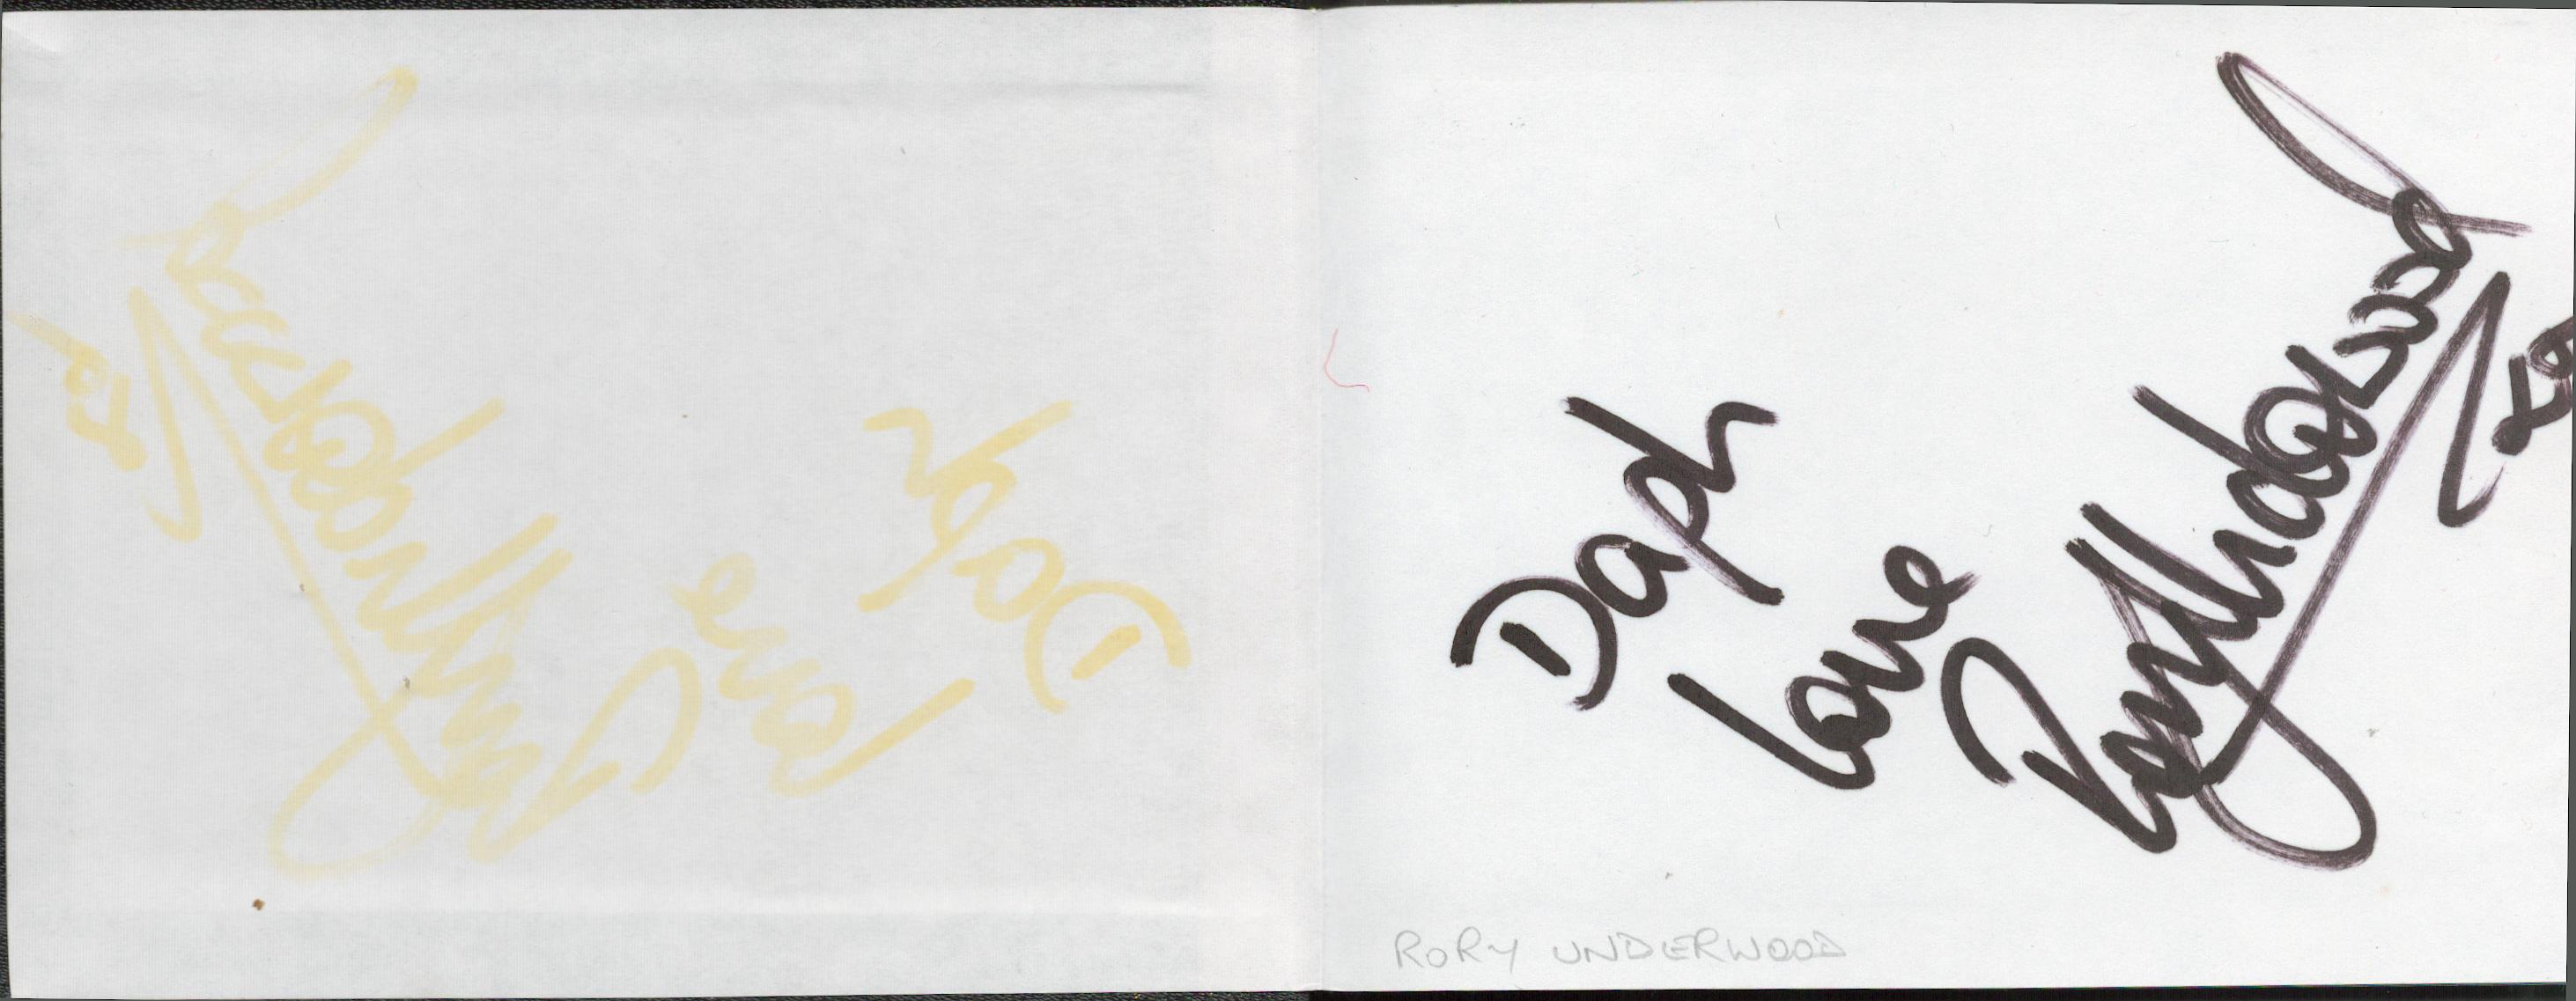 An Autograph Book Containing 25 Fantastic Signatures including Rory Underwood, Jackie Oliver,